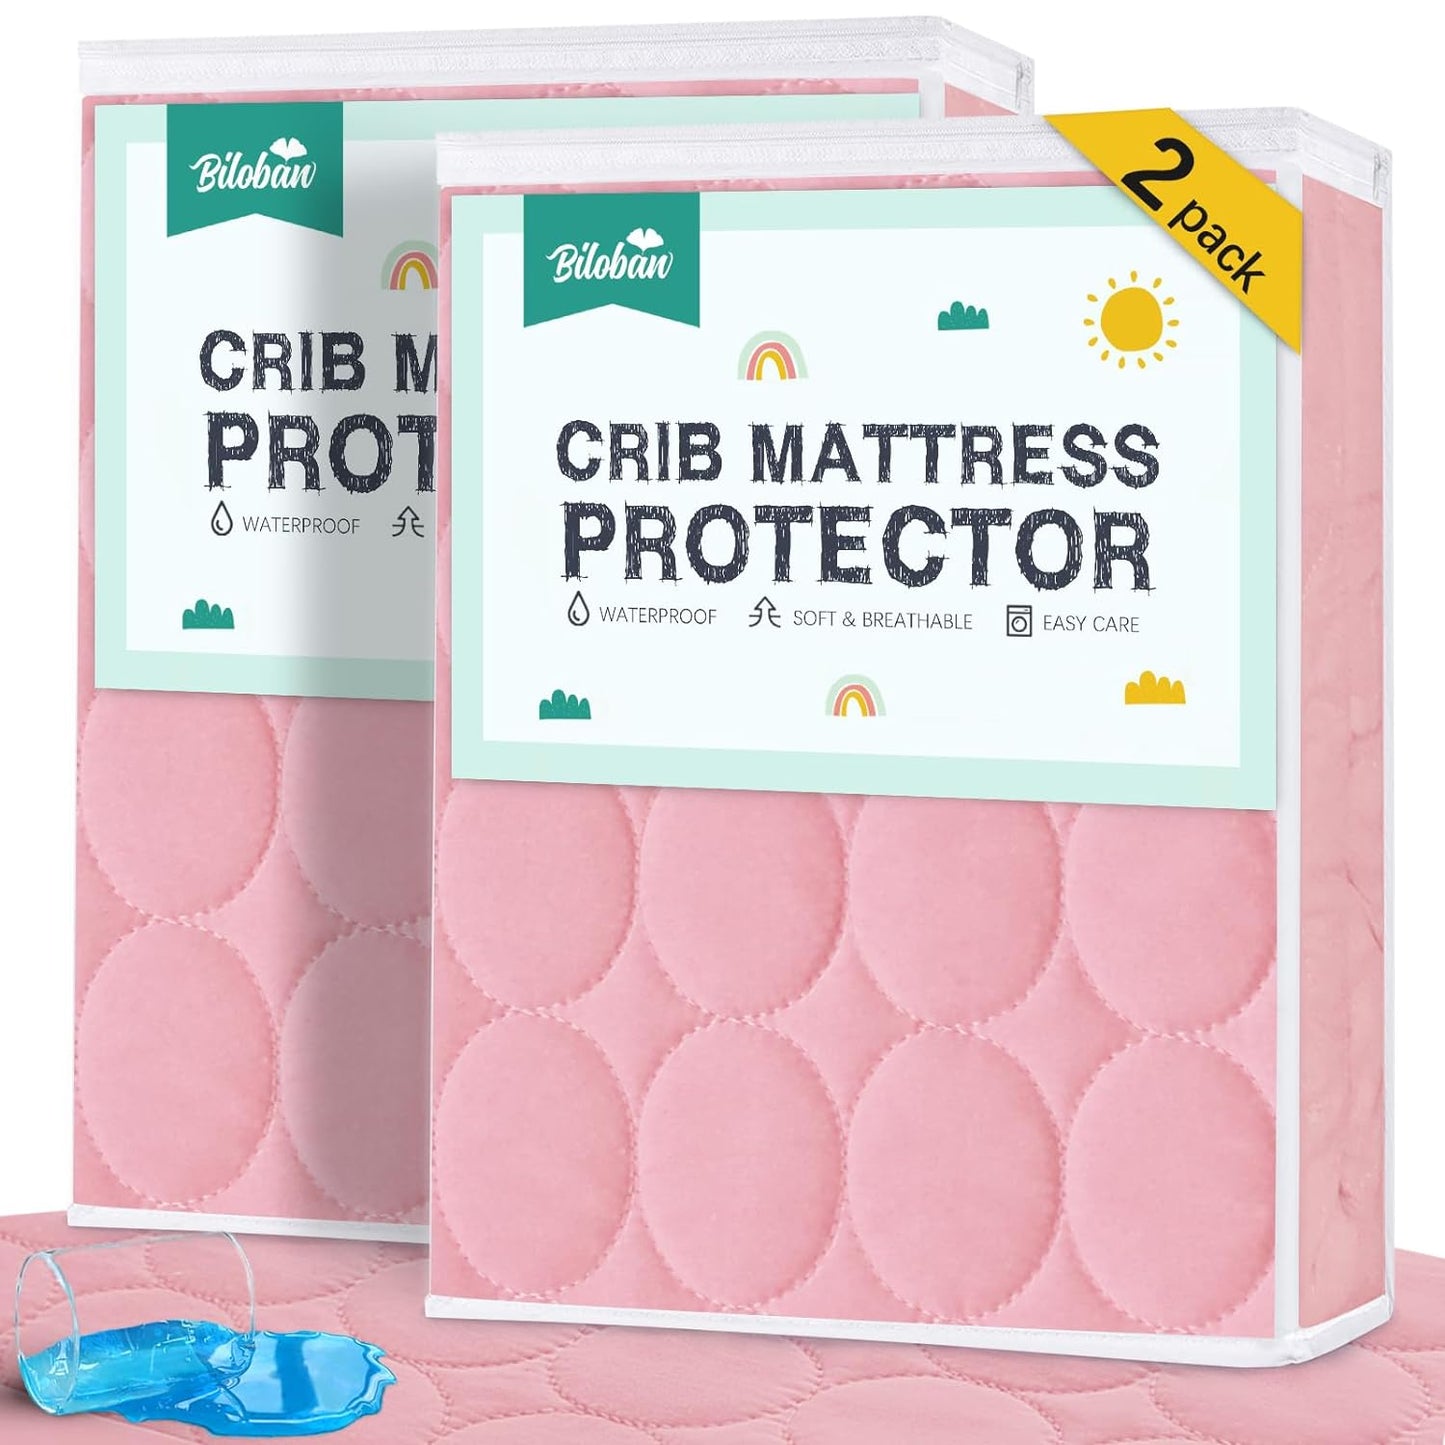 Crib Mattress Protector/ Pad Cover - 2 Pack, Quilted Microfiber, Waterproof (for Standard Crib/ Toddler Bed), Pink - Biloban Online Store